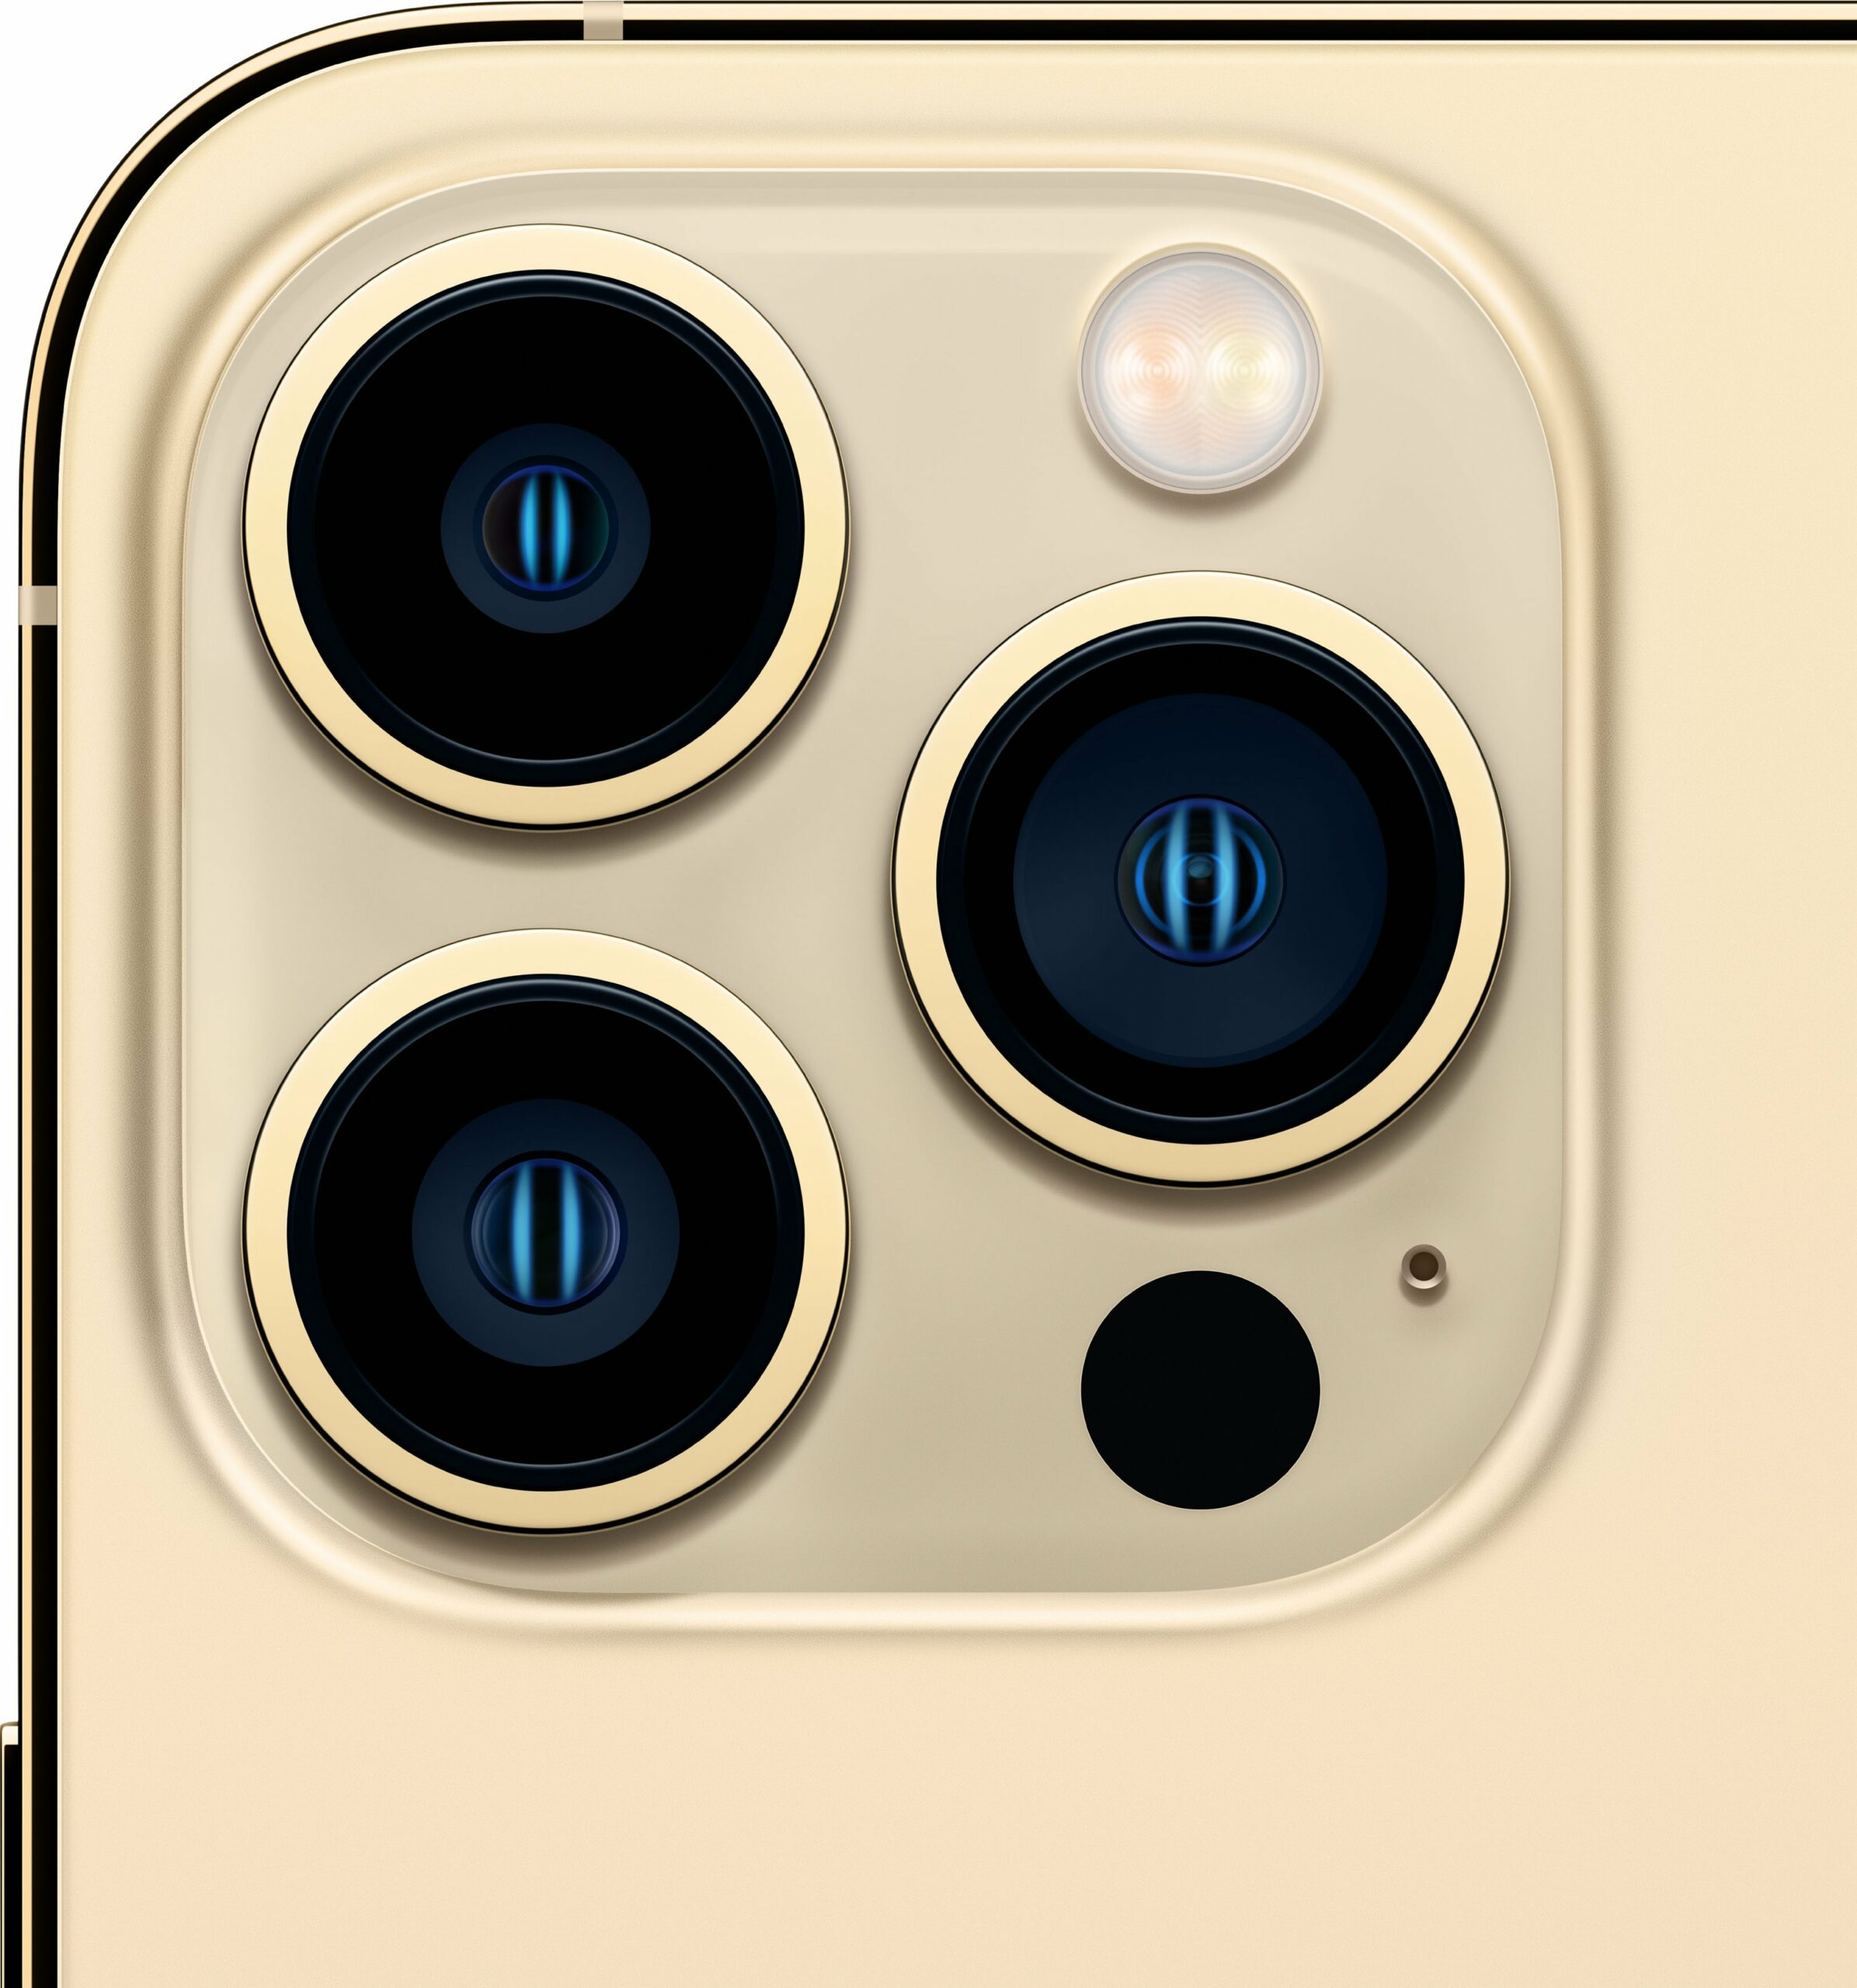 Triple-lens camera of the iPhone 13 Pro Max